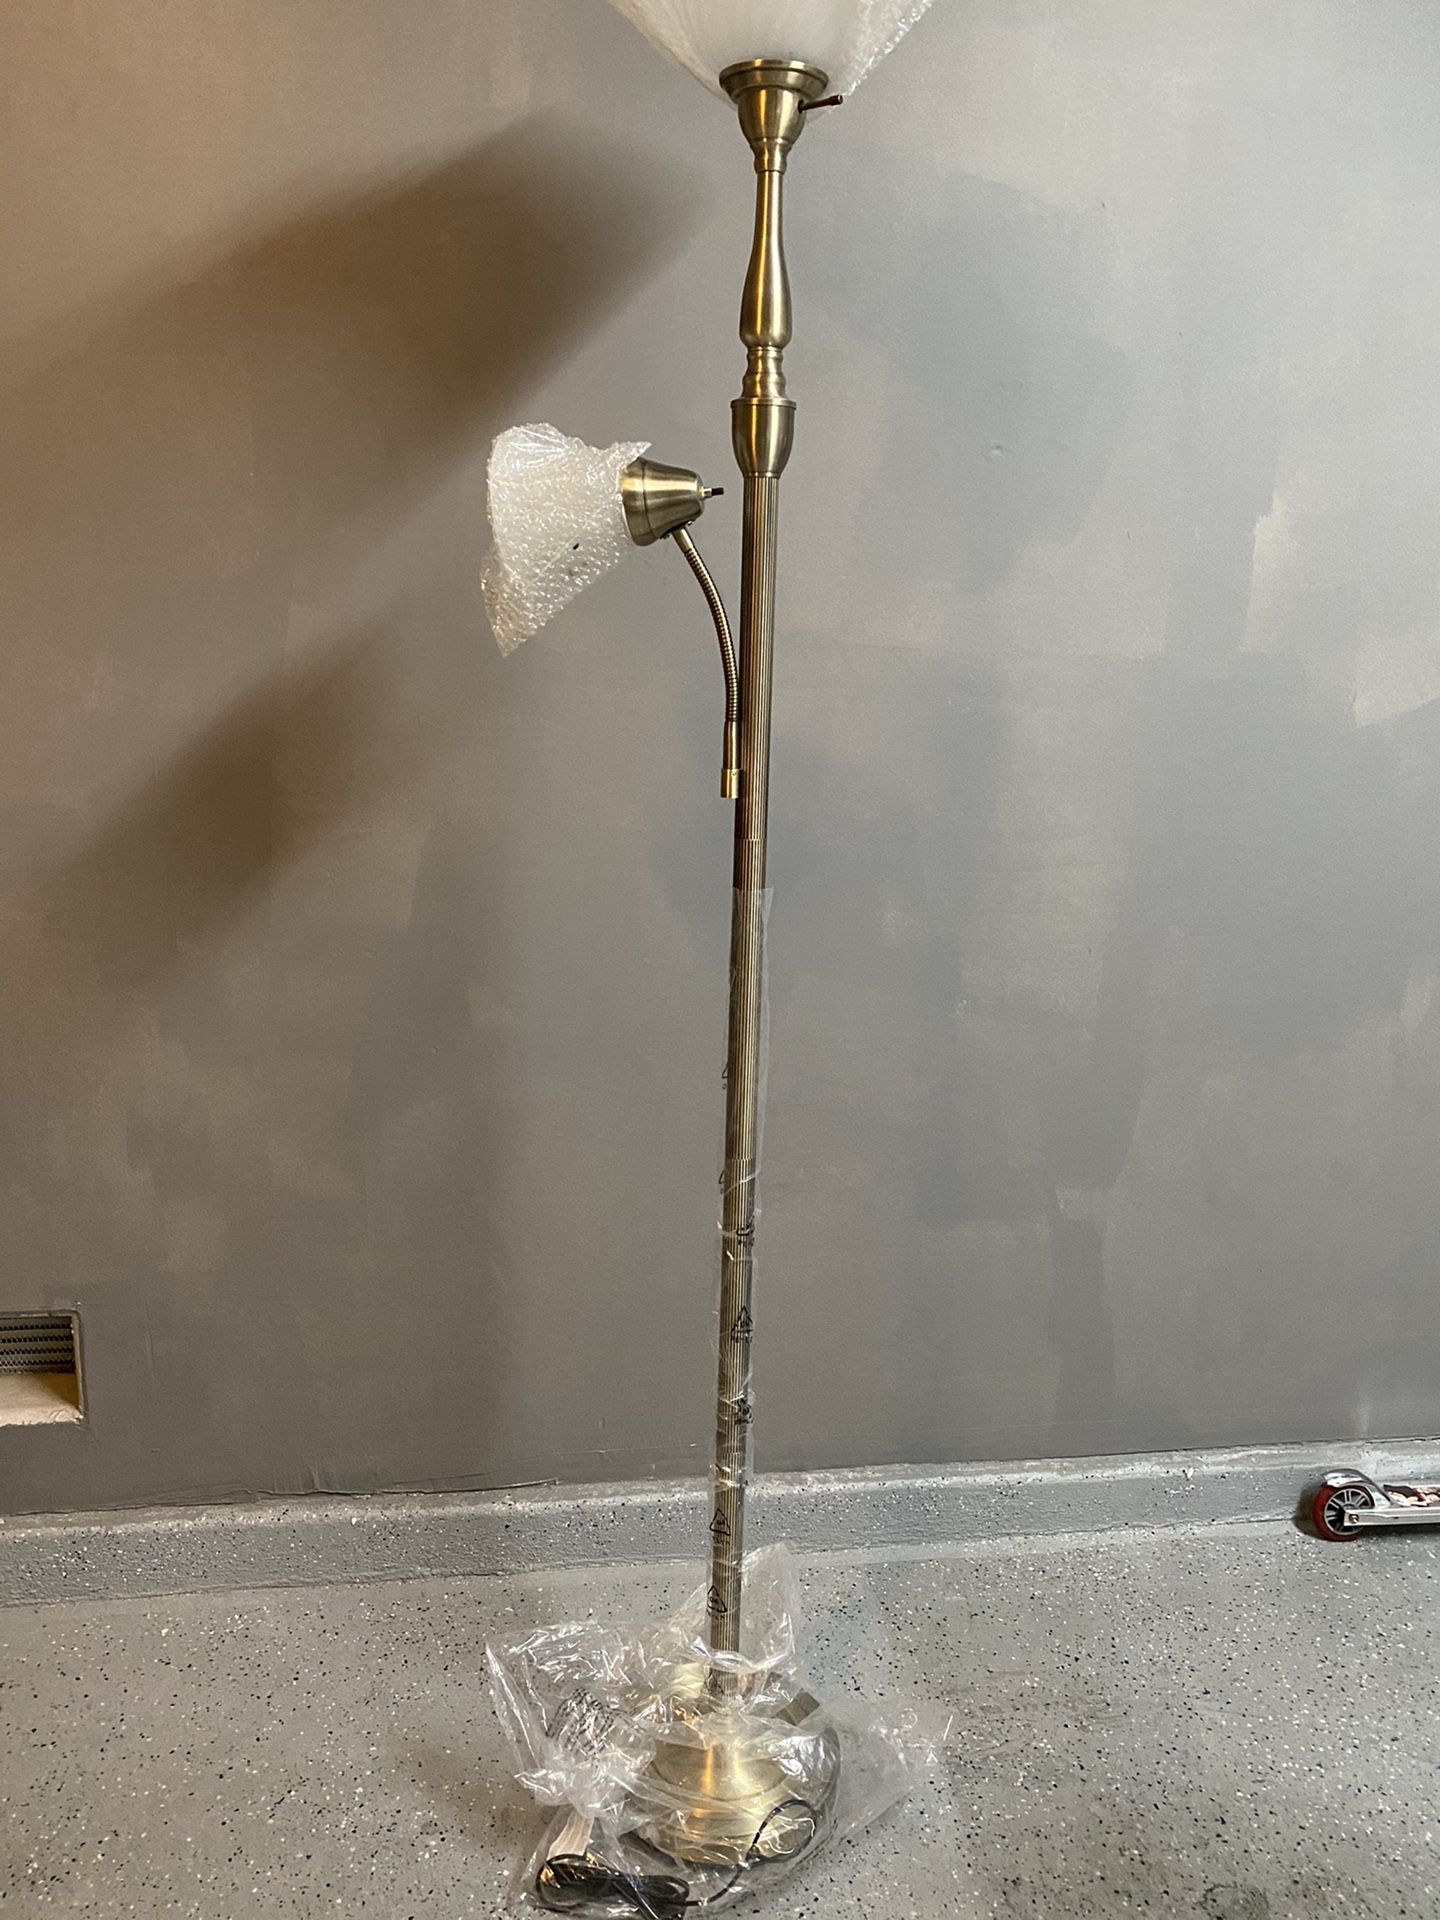 New Floor Lamp for sale - never used